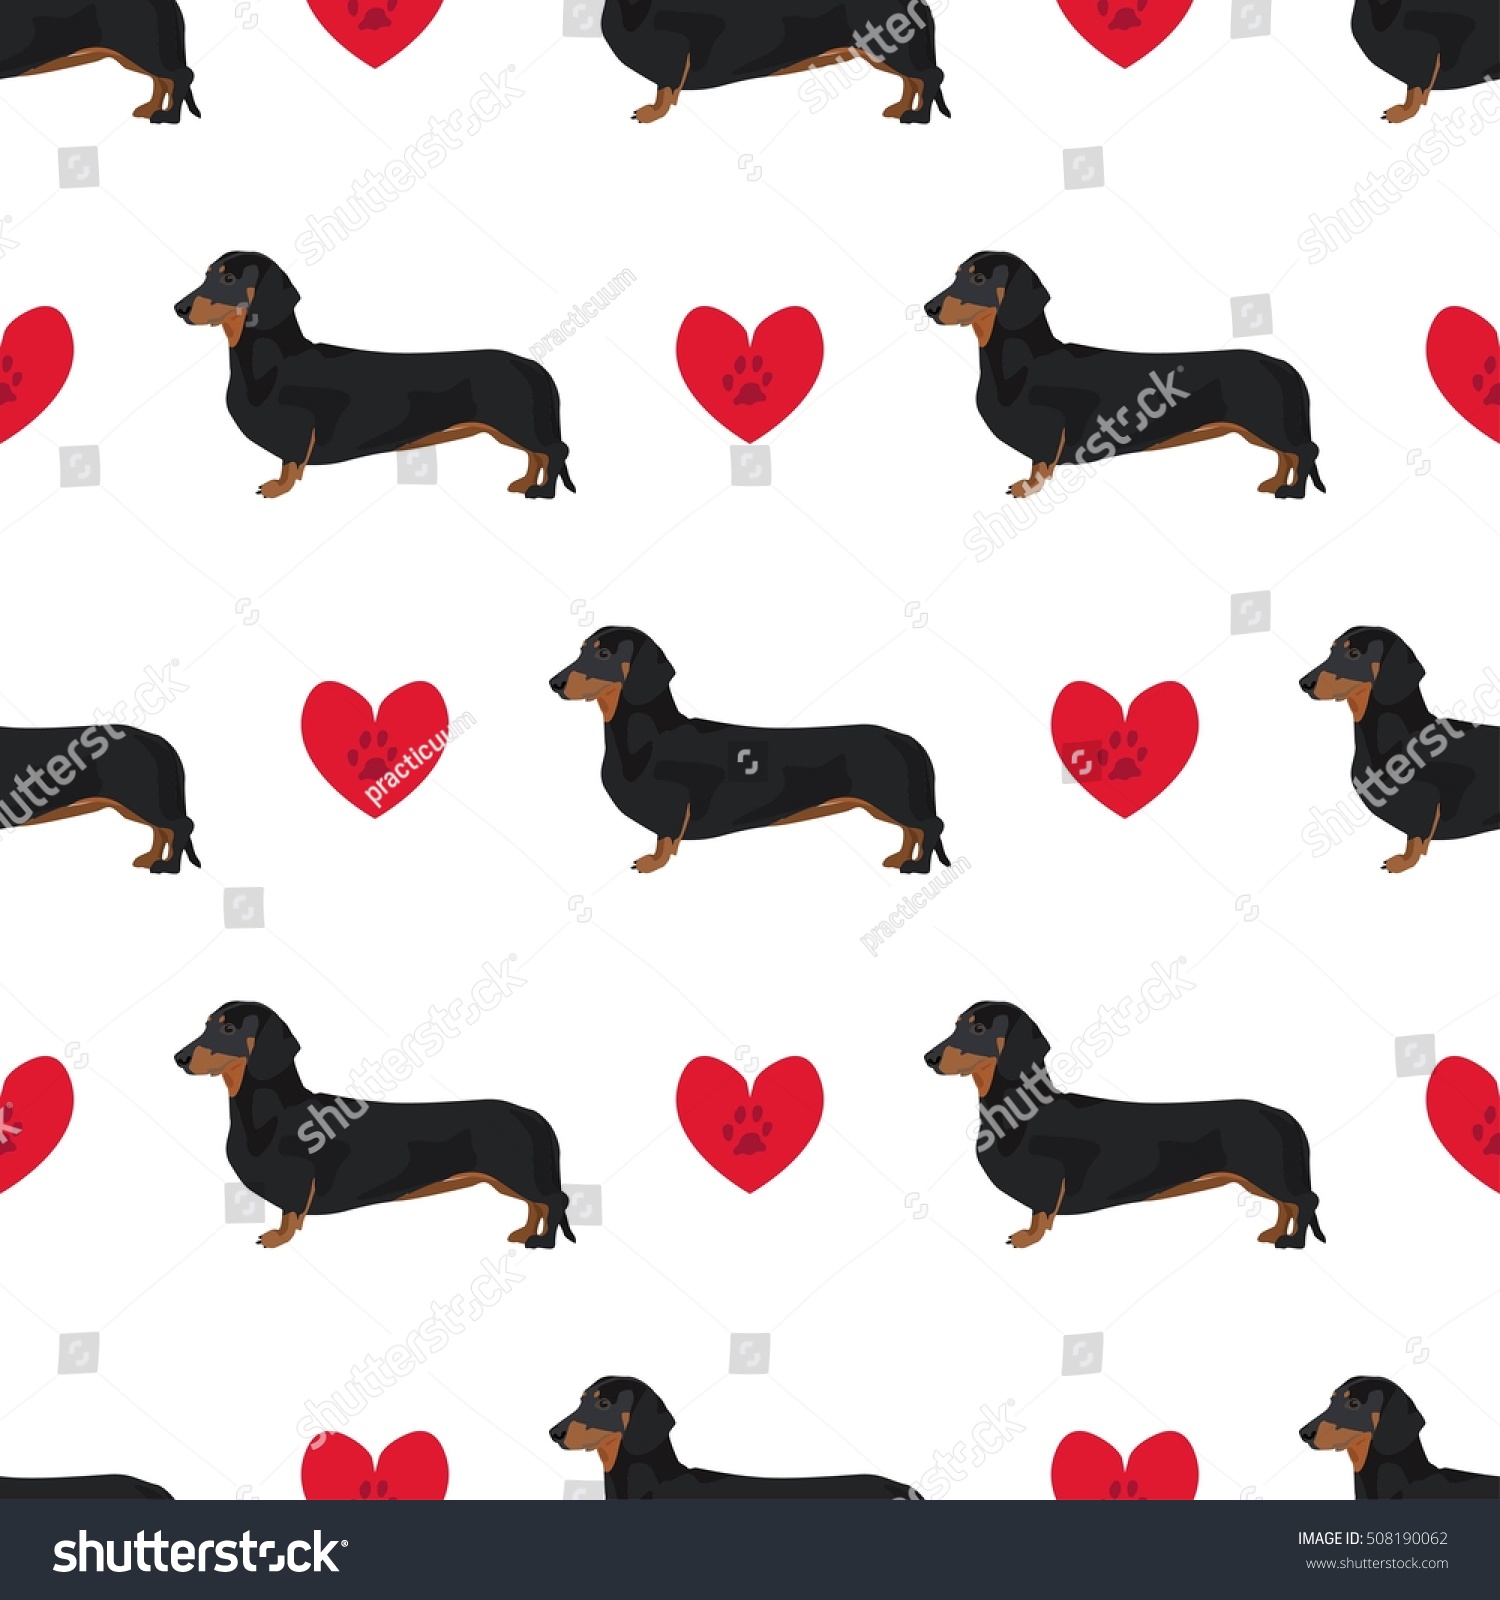 SVG of Dachshund dog seamless pattern colorful background with hearts svg